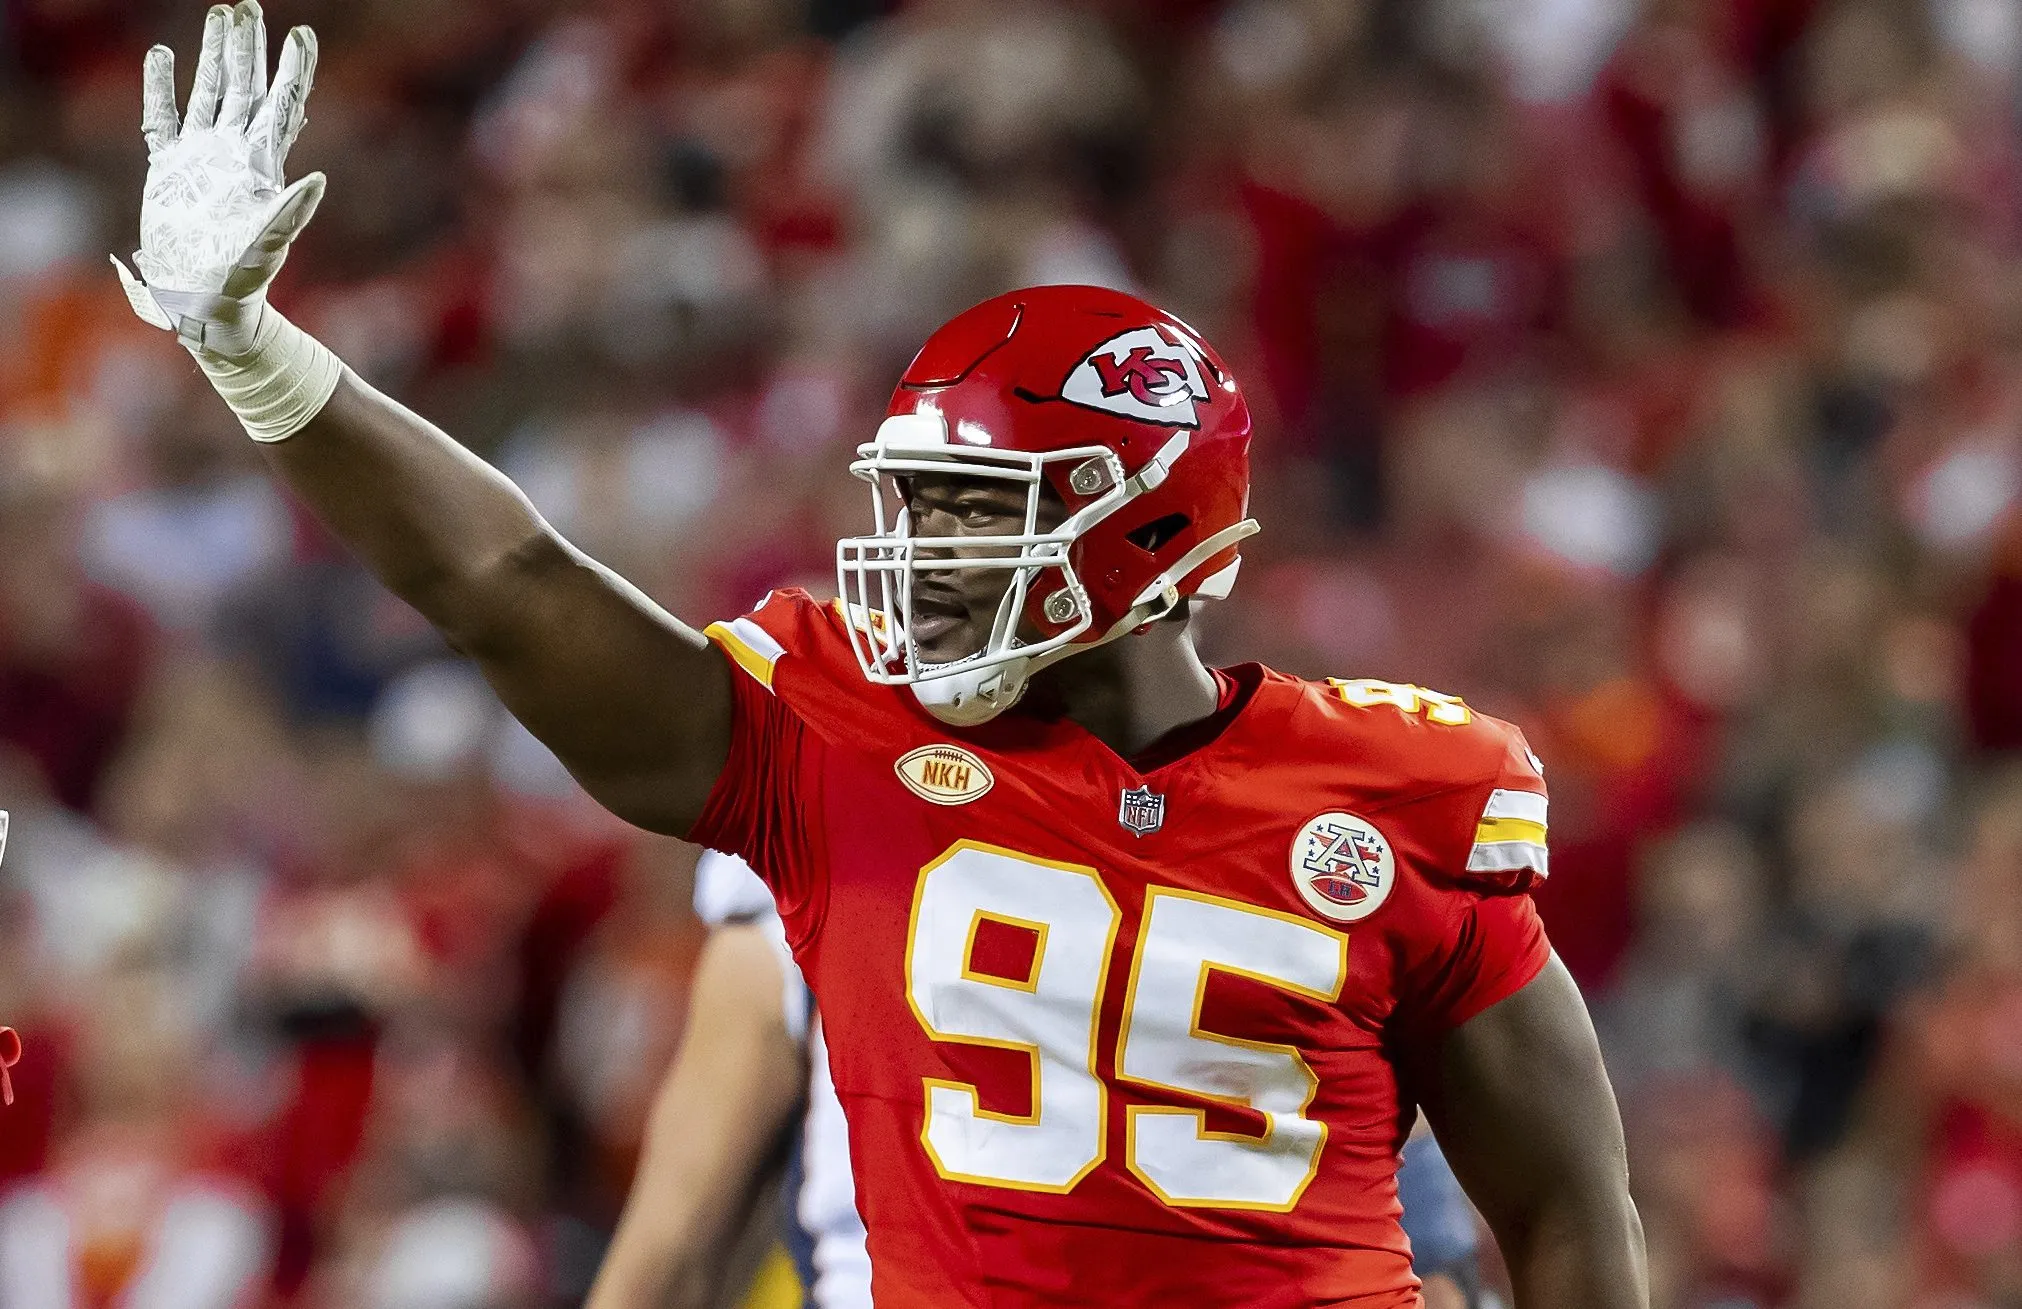 Chiefs' Offseason Dilemma Will Big Contracts and Salary Cap Challenges Shake Up the Super Bowl Champs' Roster